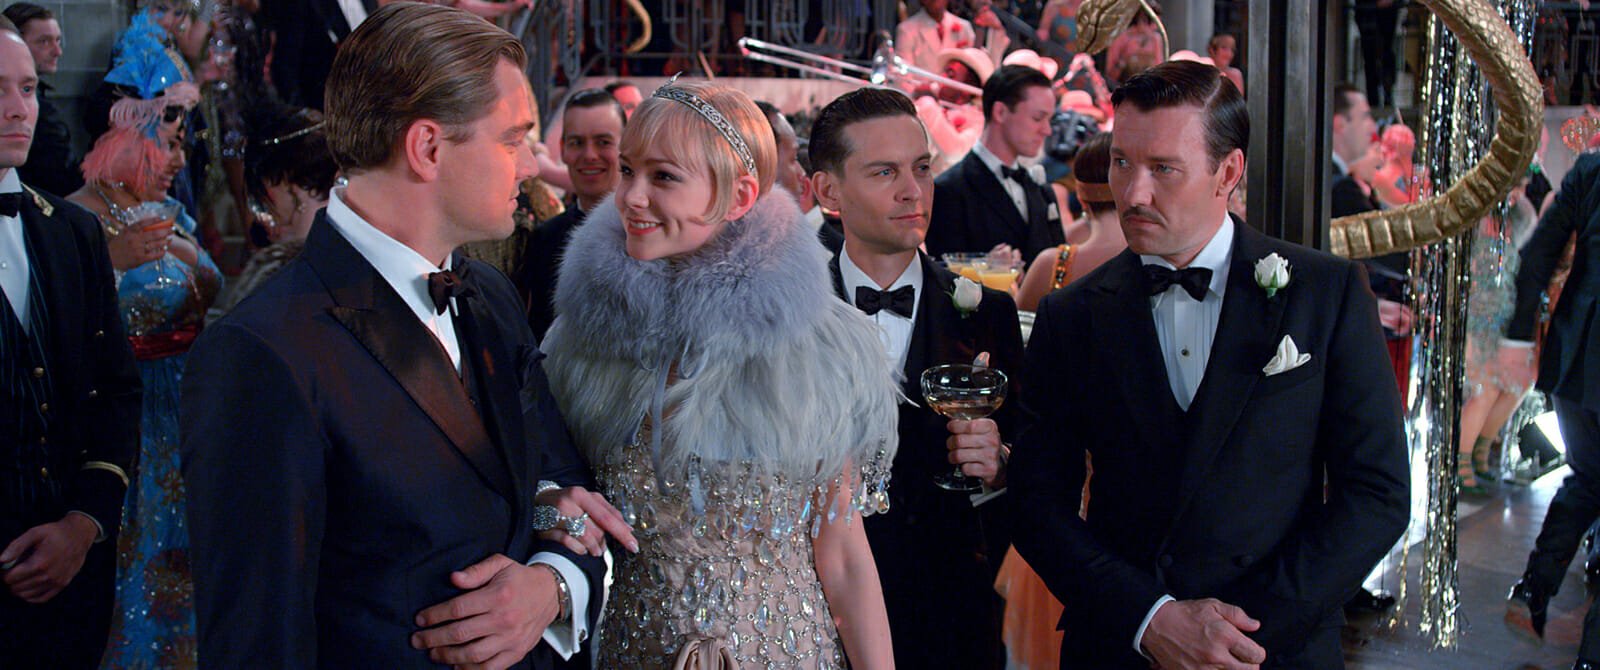 Movies about rich people: The Great Gatsby